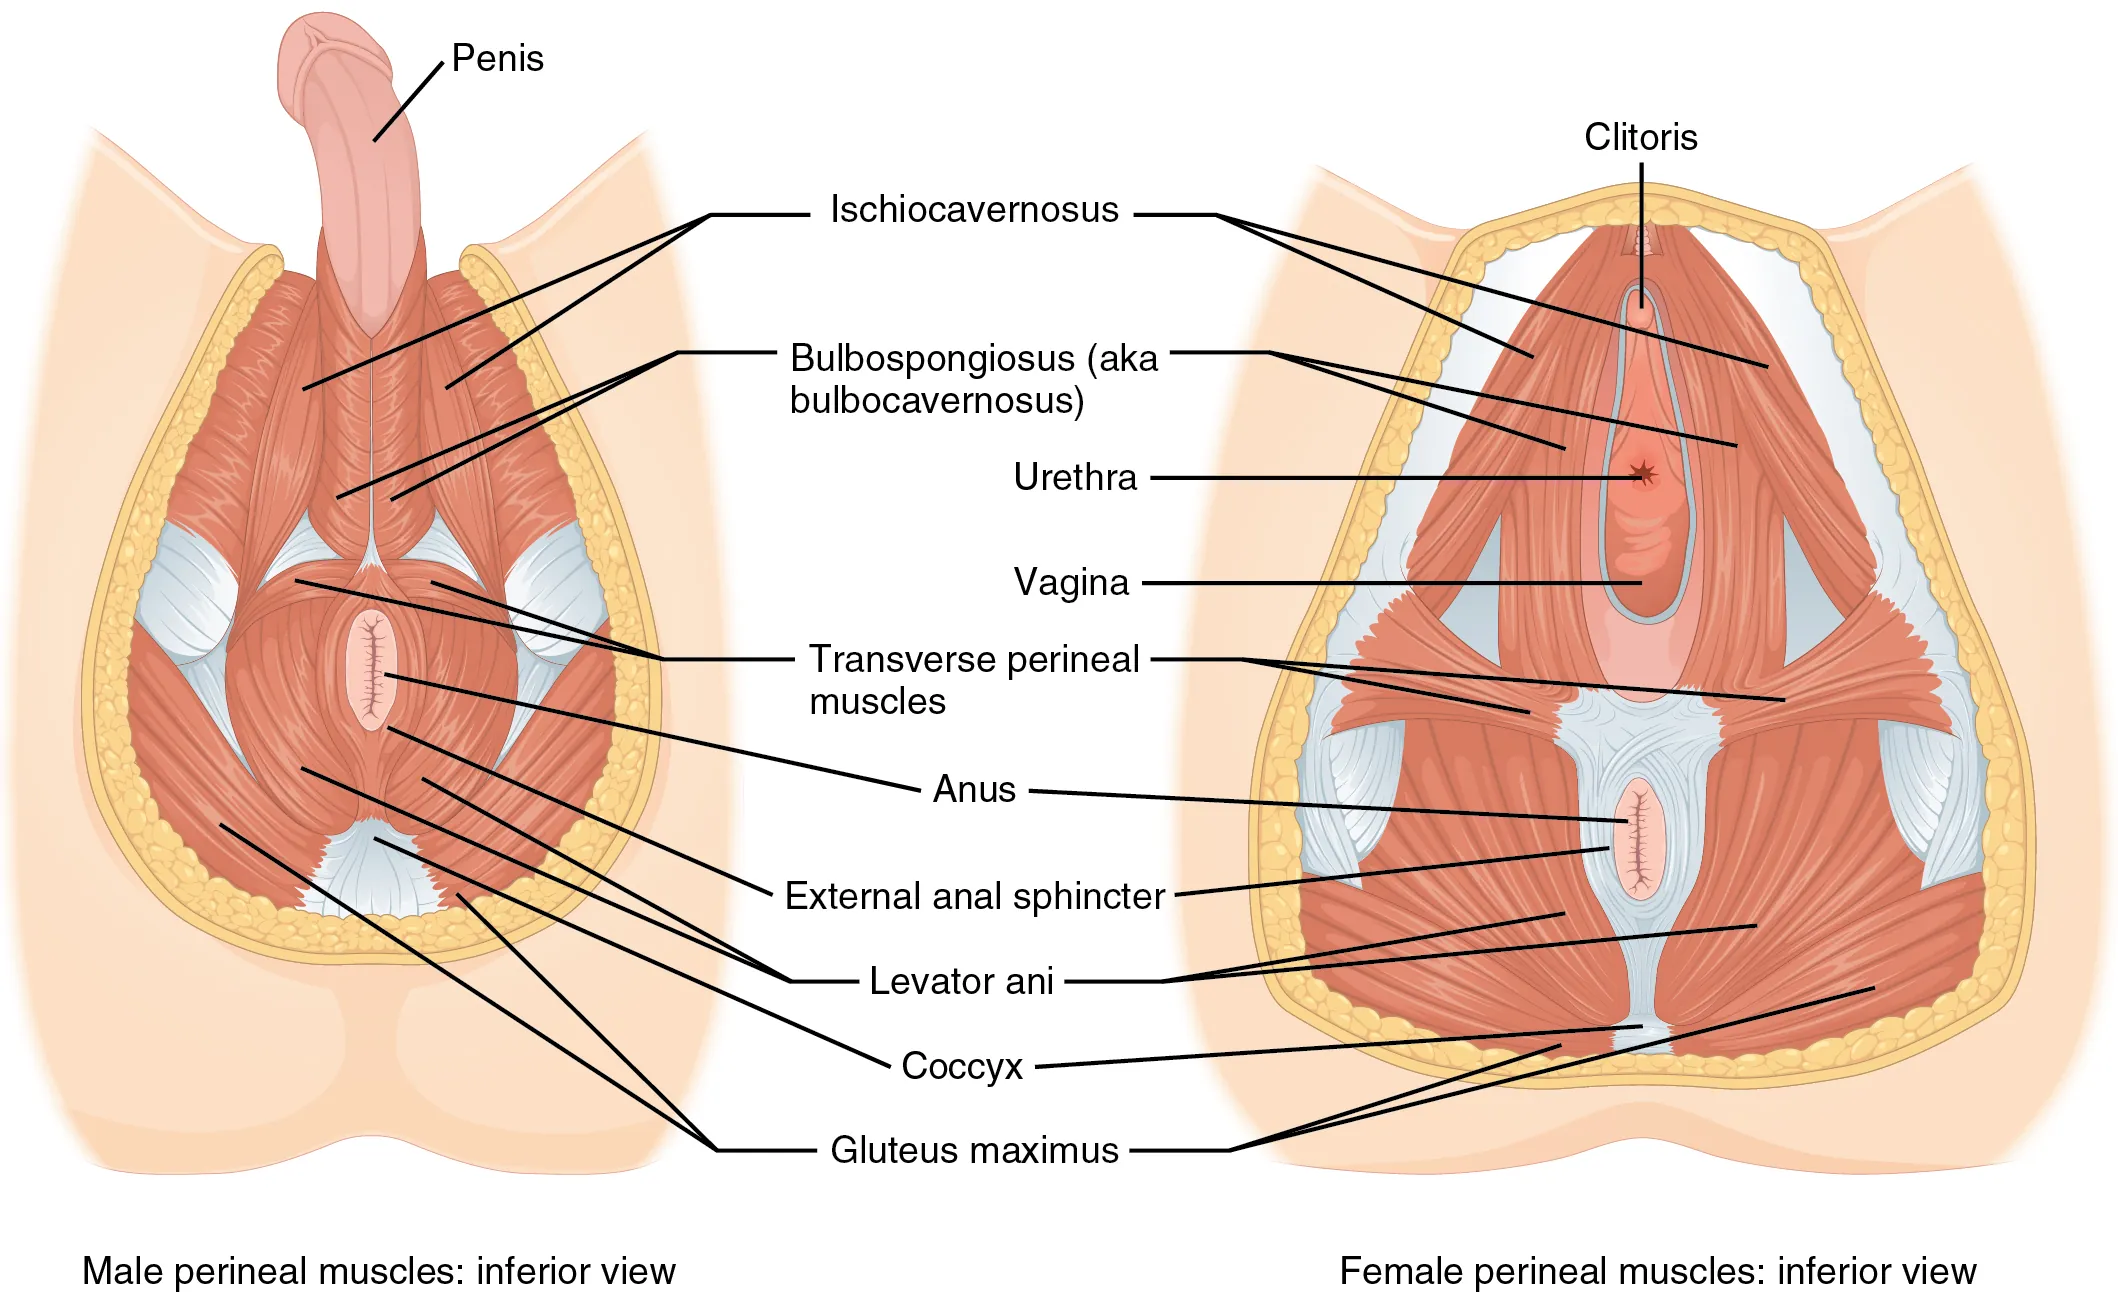 The left panel shows the muscles of the perineum in the male, and the right panel shows the muscles of the perineum in the female.